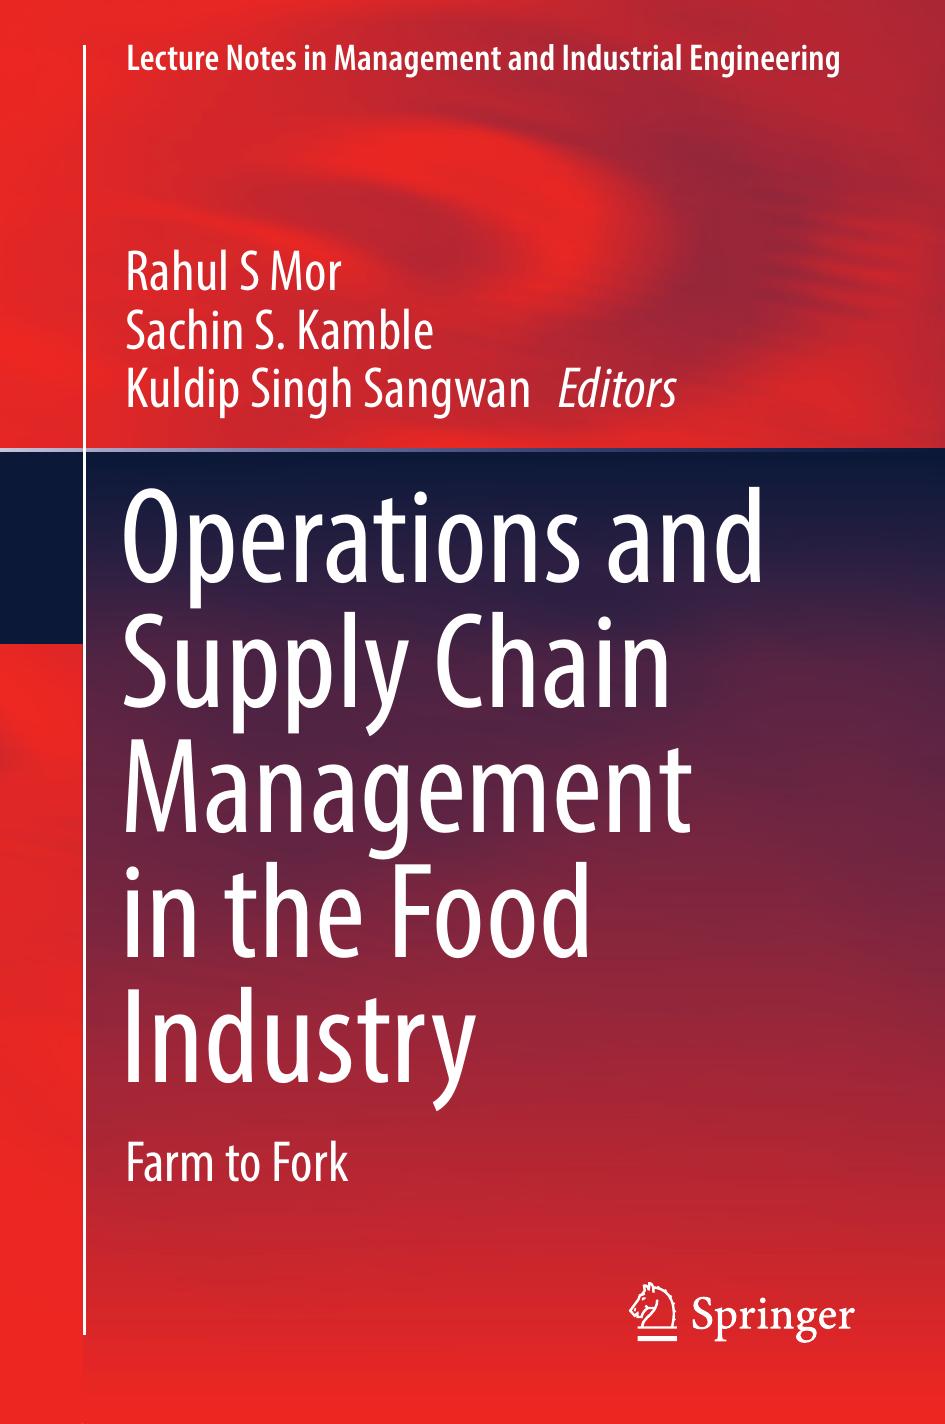 Operations and Supply Chain Management in the Food Industry  Farm to Fork-Springer (2022